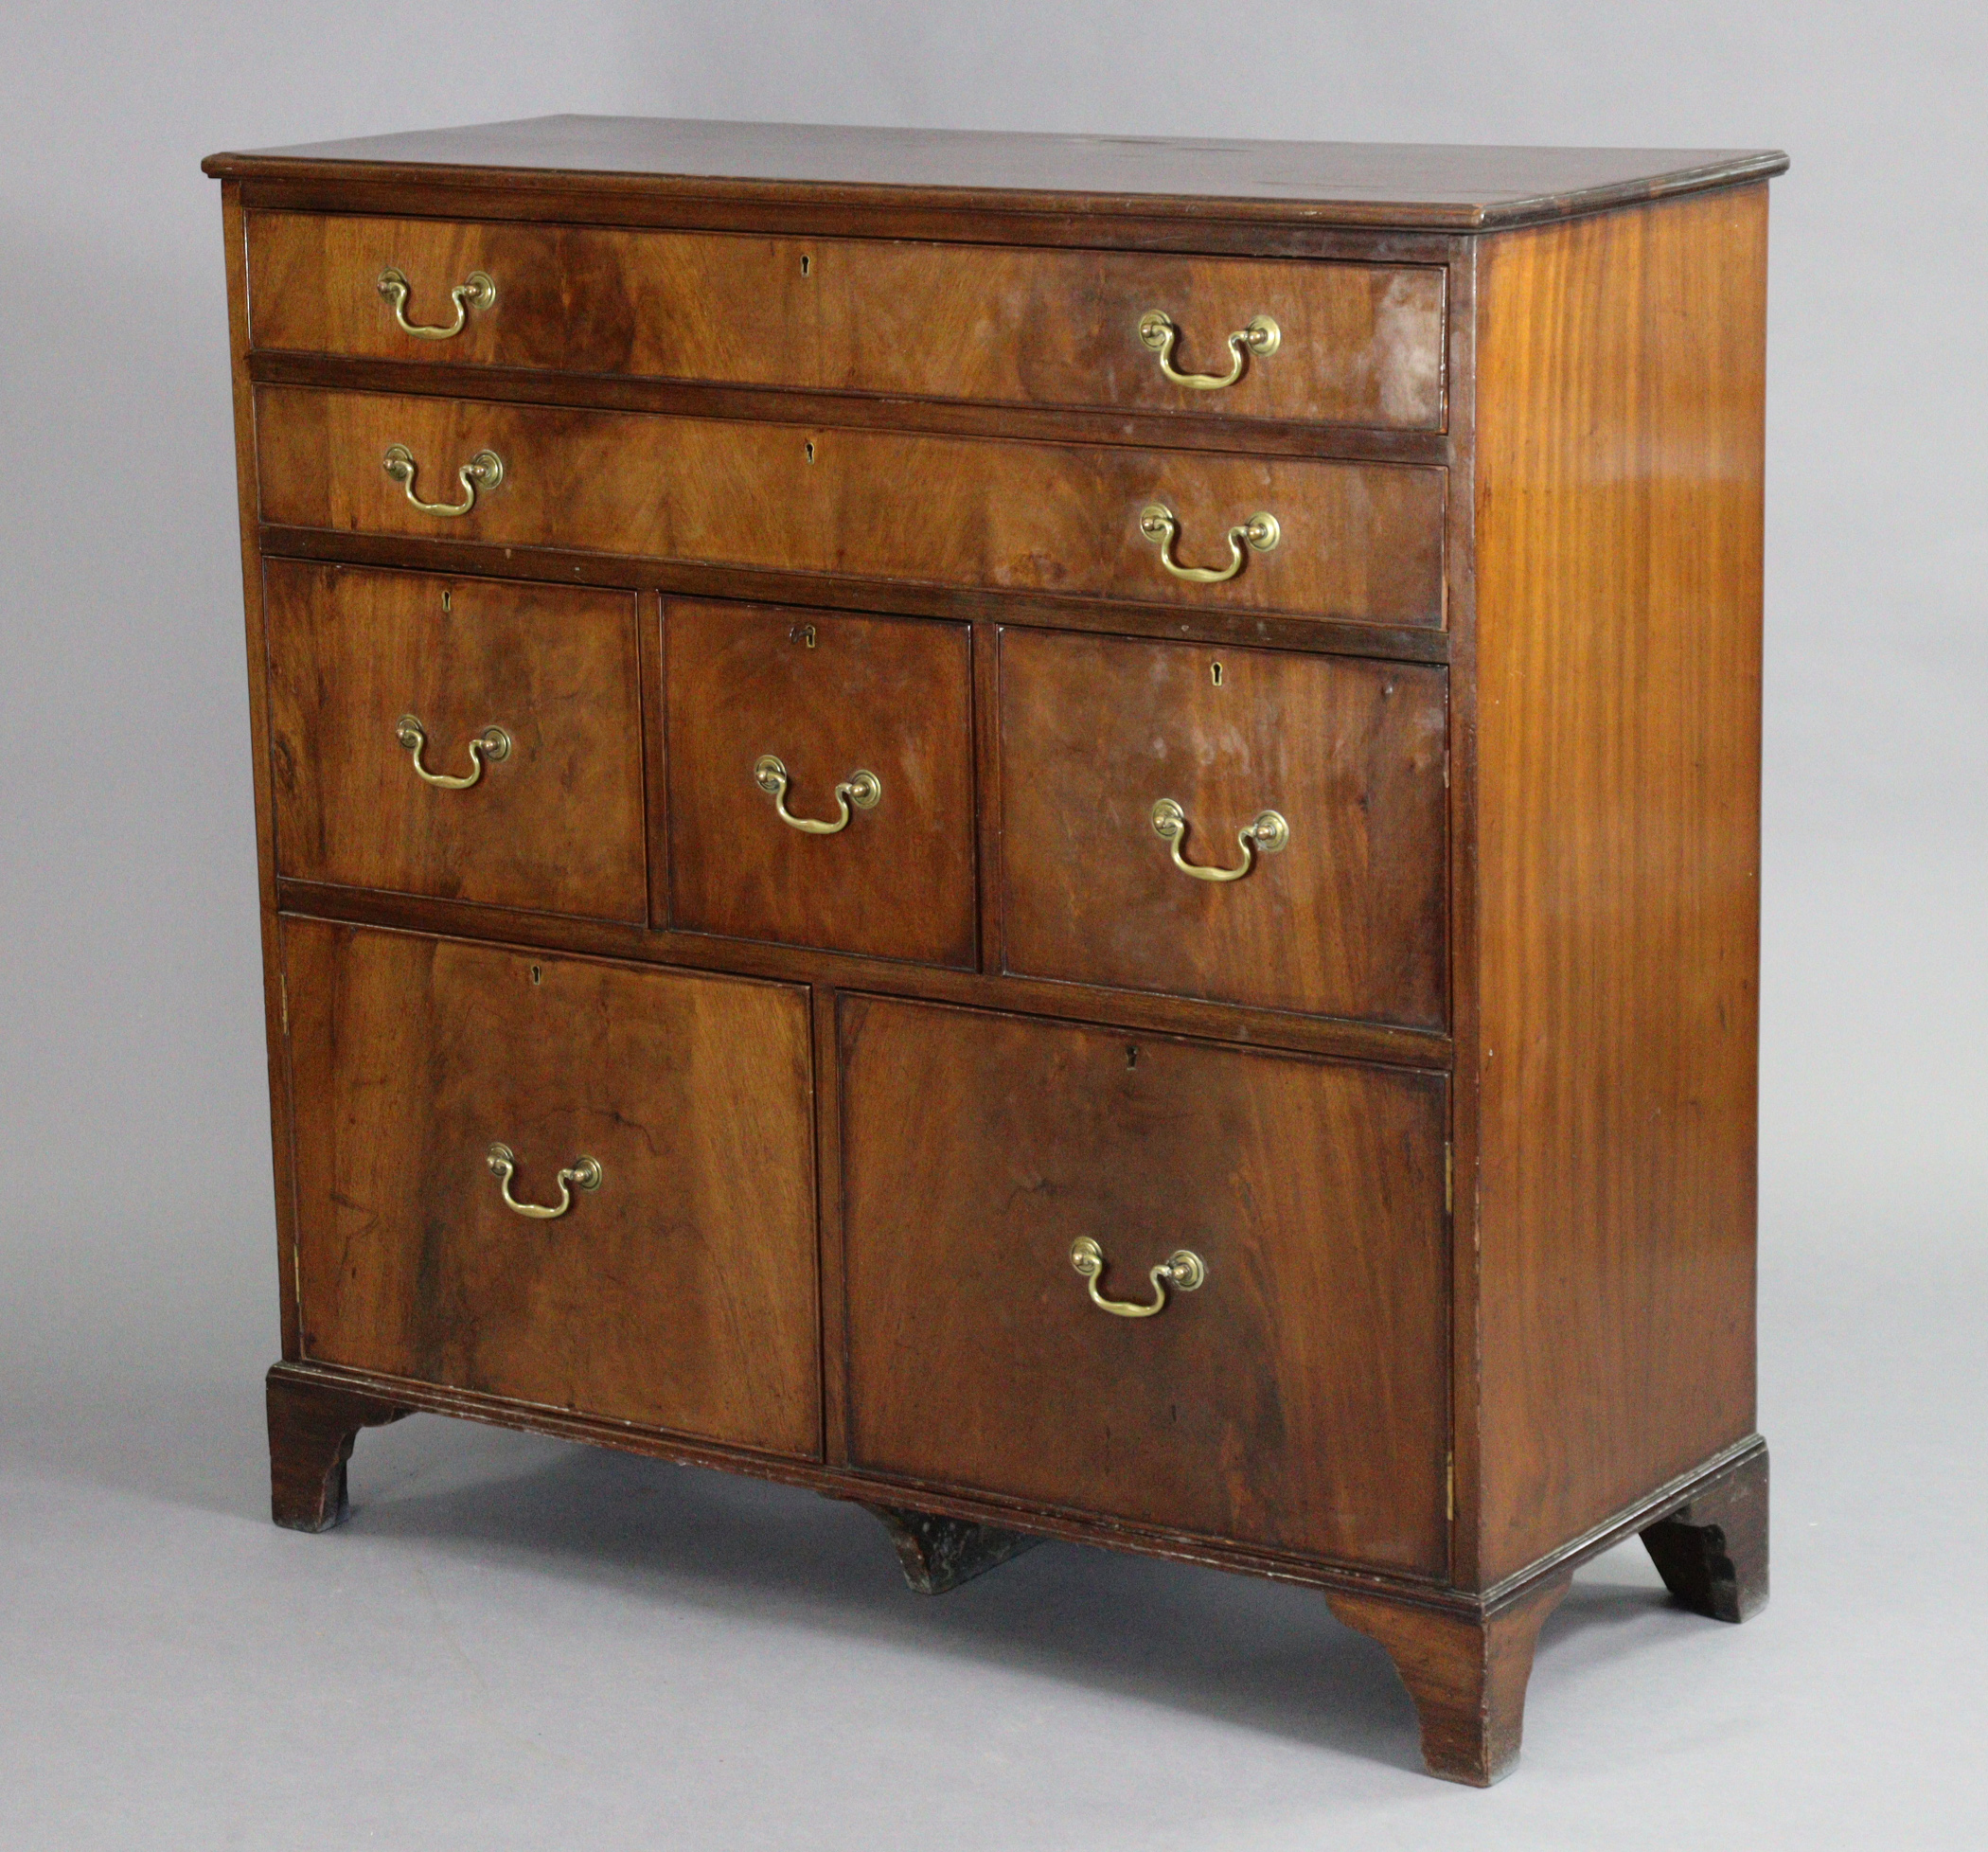 A 19th century mahogany chest, with moulded edge to the plain rectangular top, fitted with an